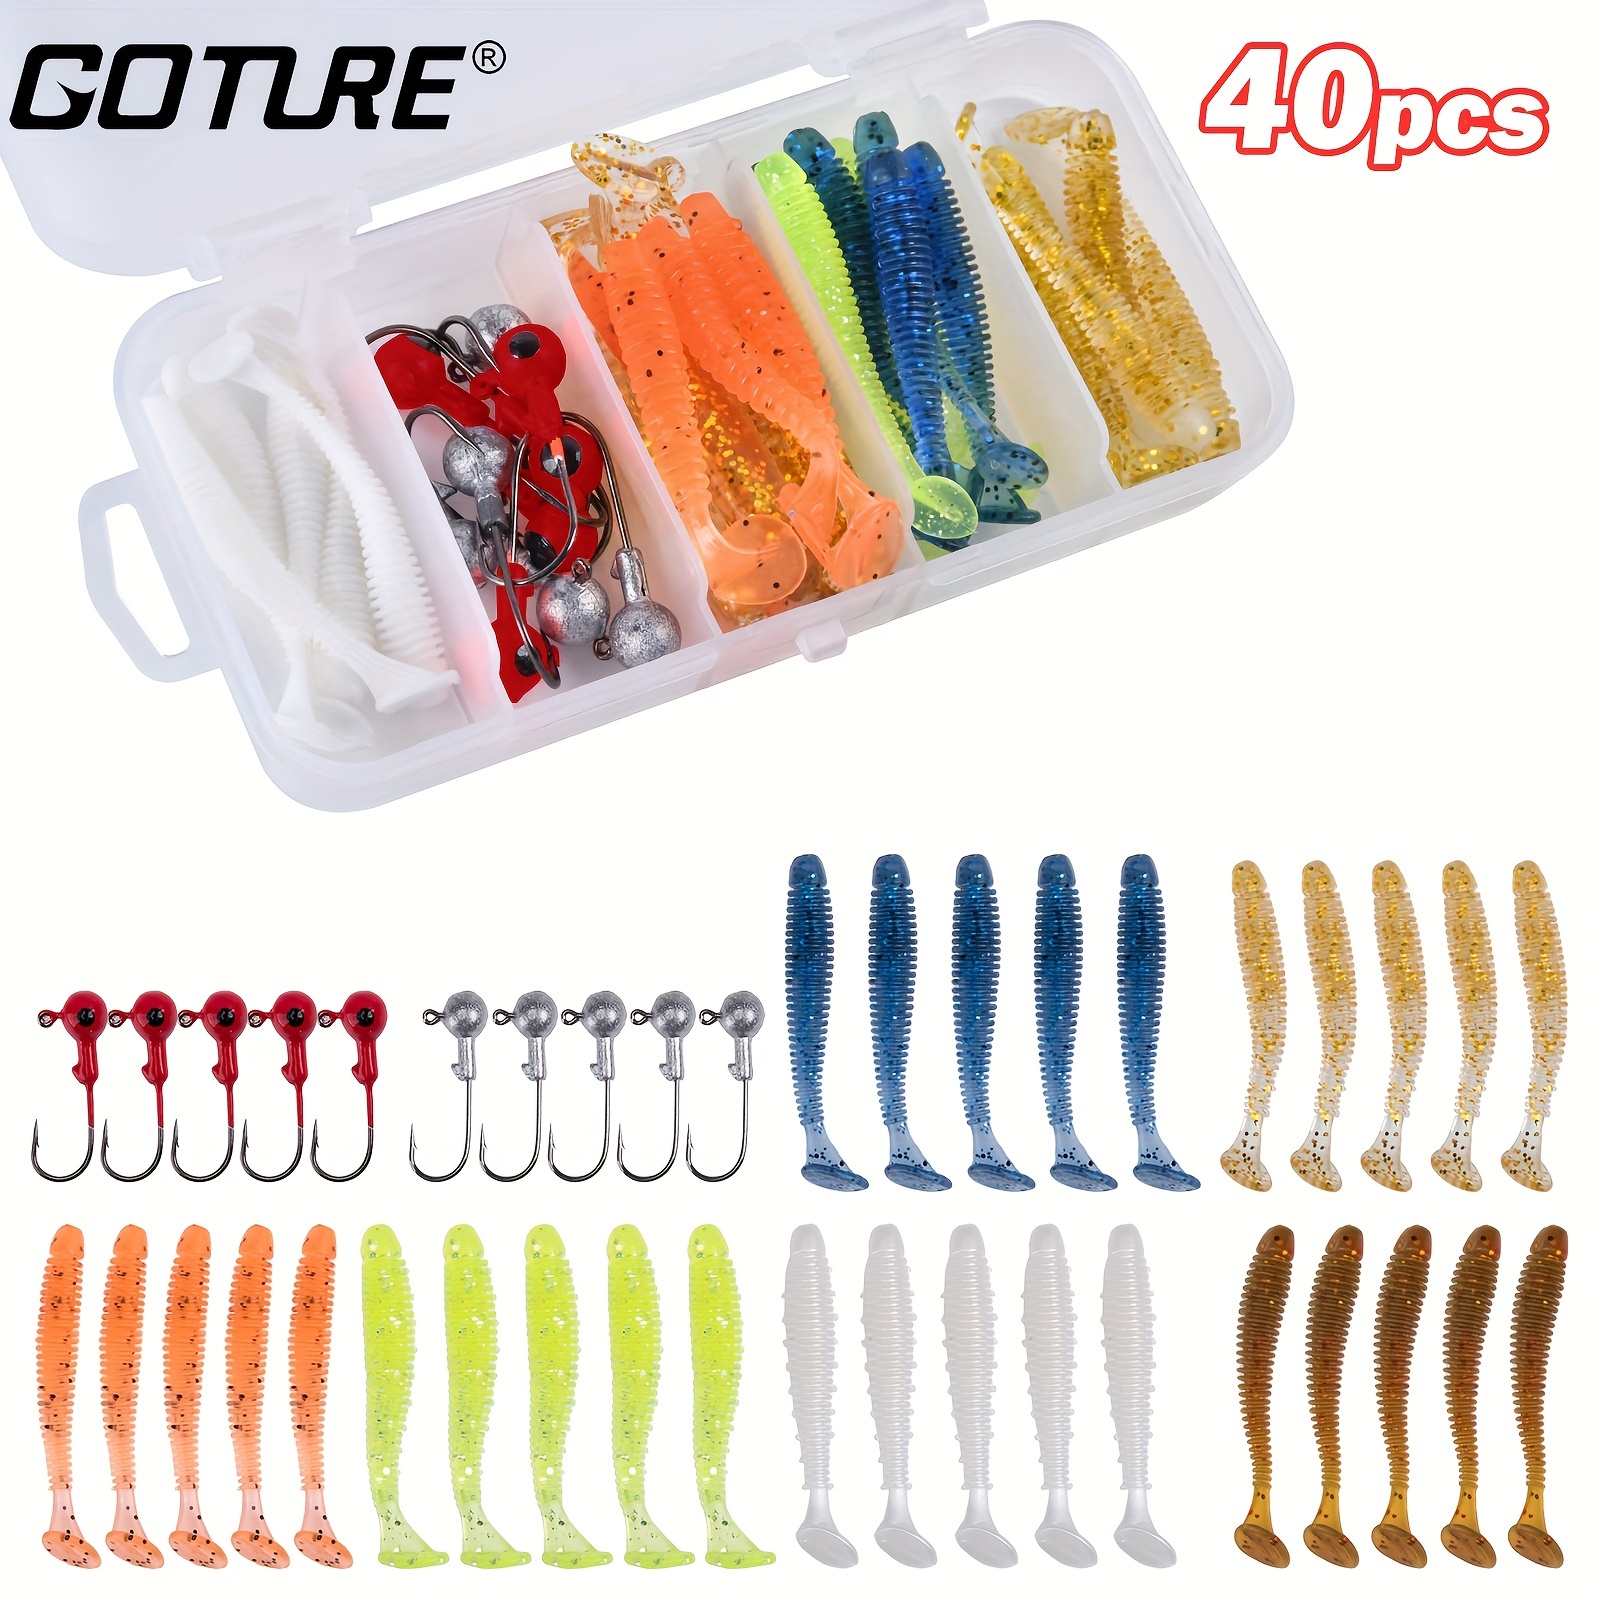 40pcs/set TPE T-Tail Soft Fishing Lures And Lead Head Fishing Jig Hooks  Set, With Fishing Tackle Box, For Freshwater & Saltwater Fishing